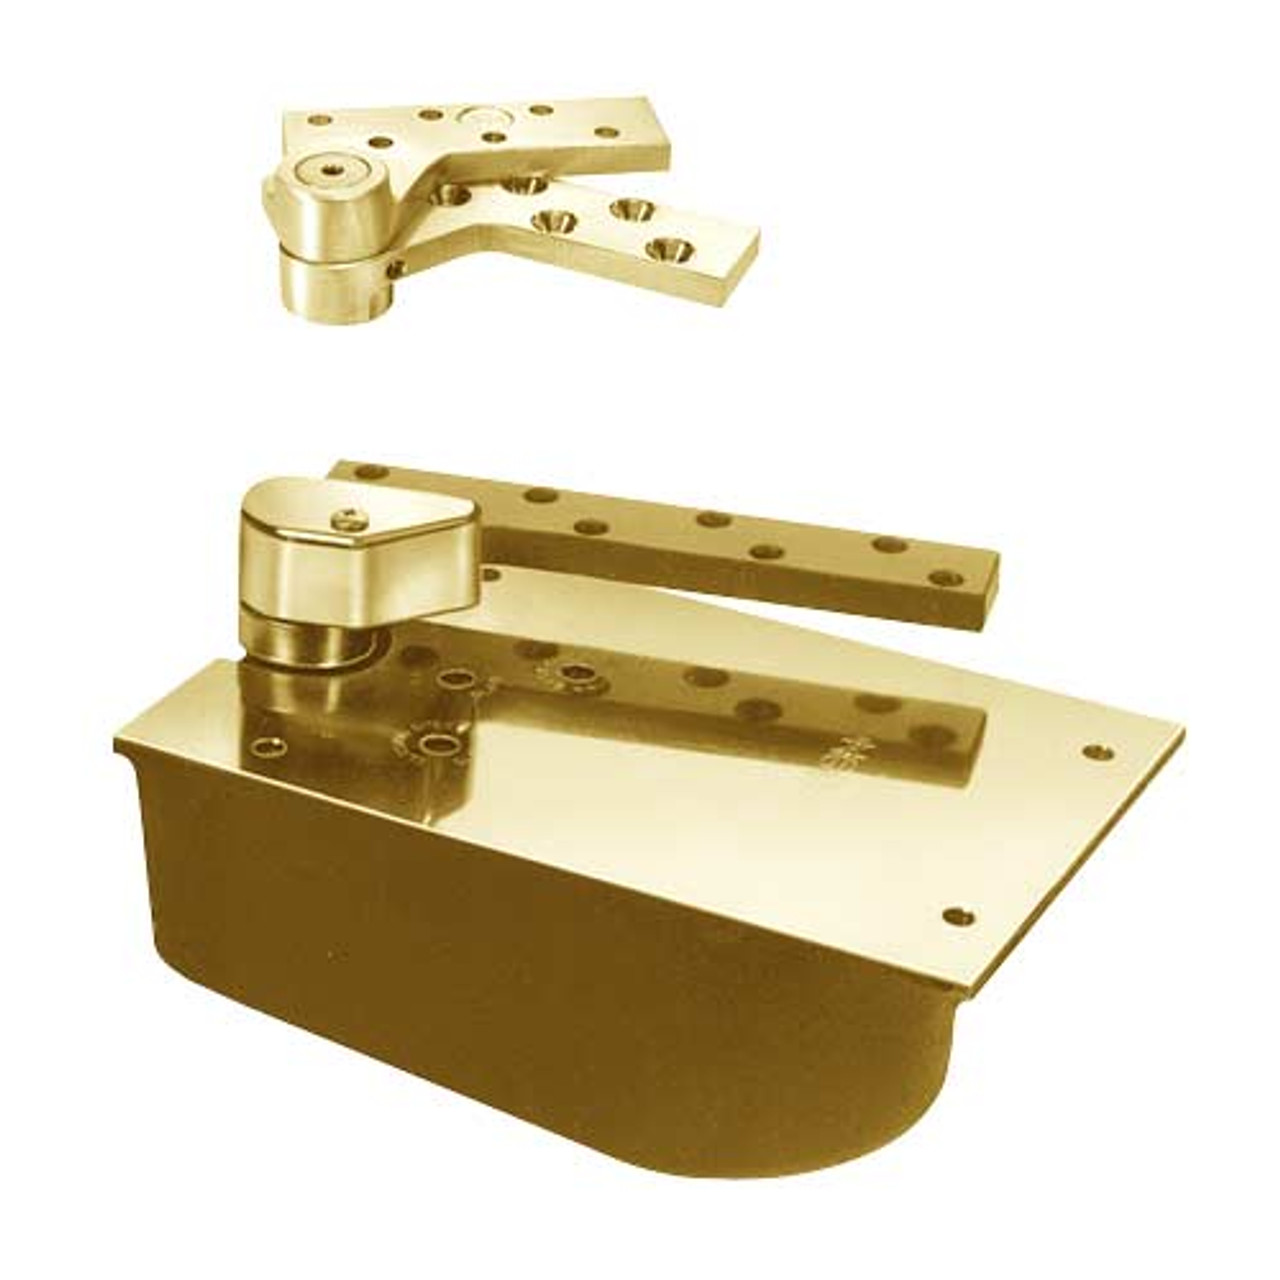 L27-90N-LFP-RH-1-3/4-605 Rixson 27 Series Extra Heavy Duty Lead Lined Offset Floor Closer in Bright Brass Finish